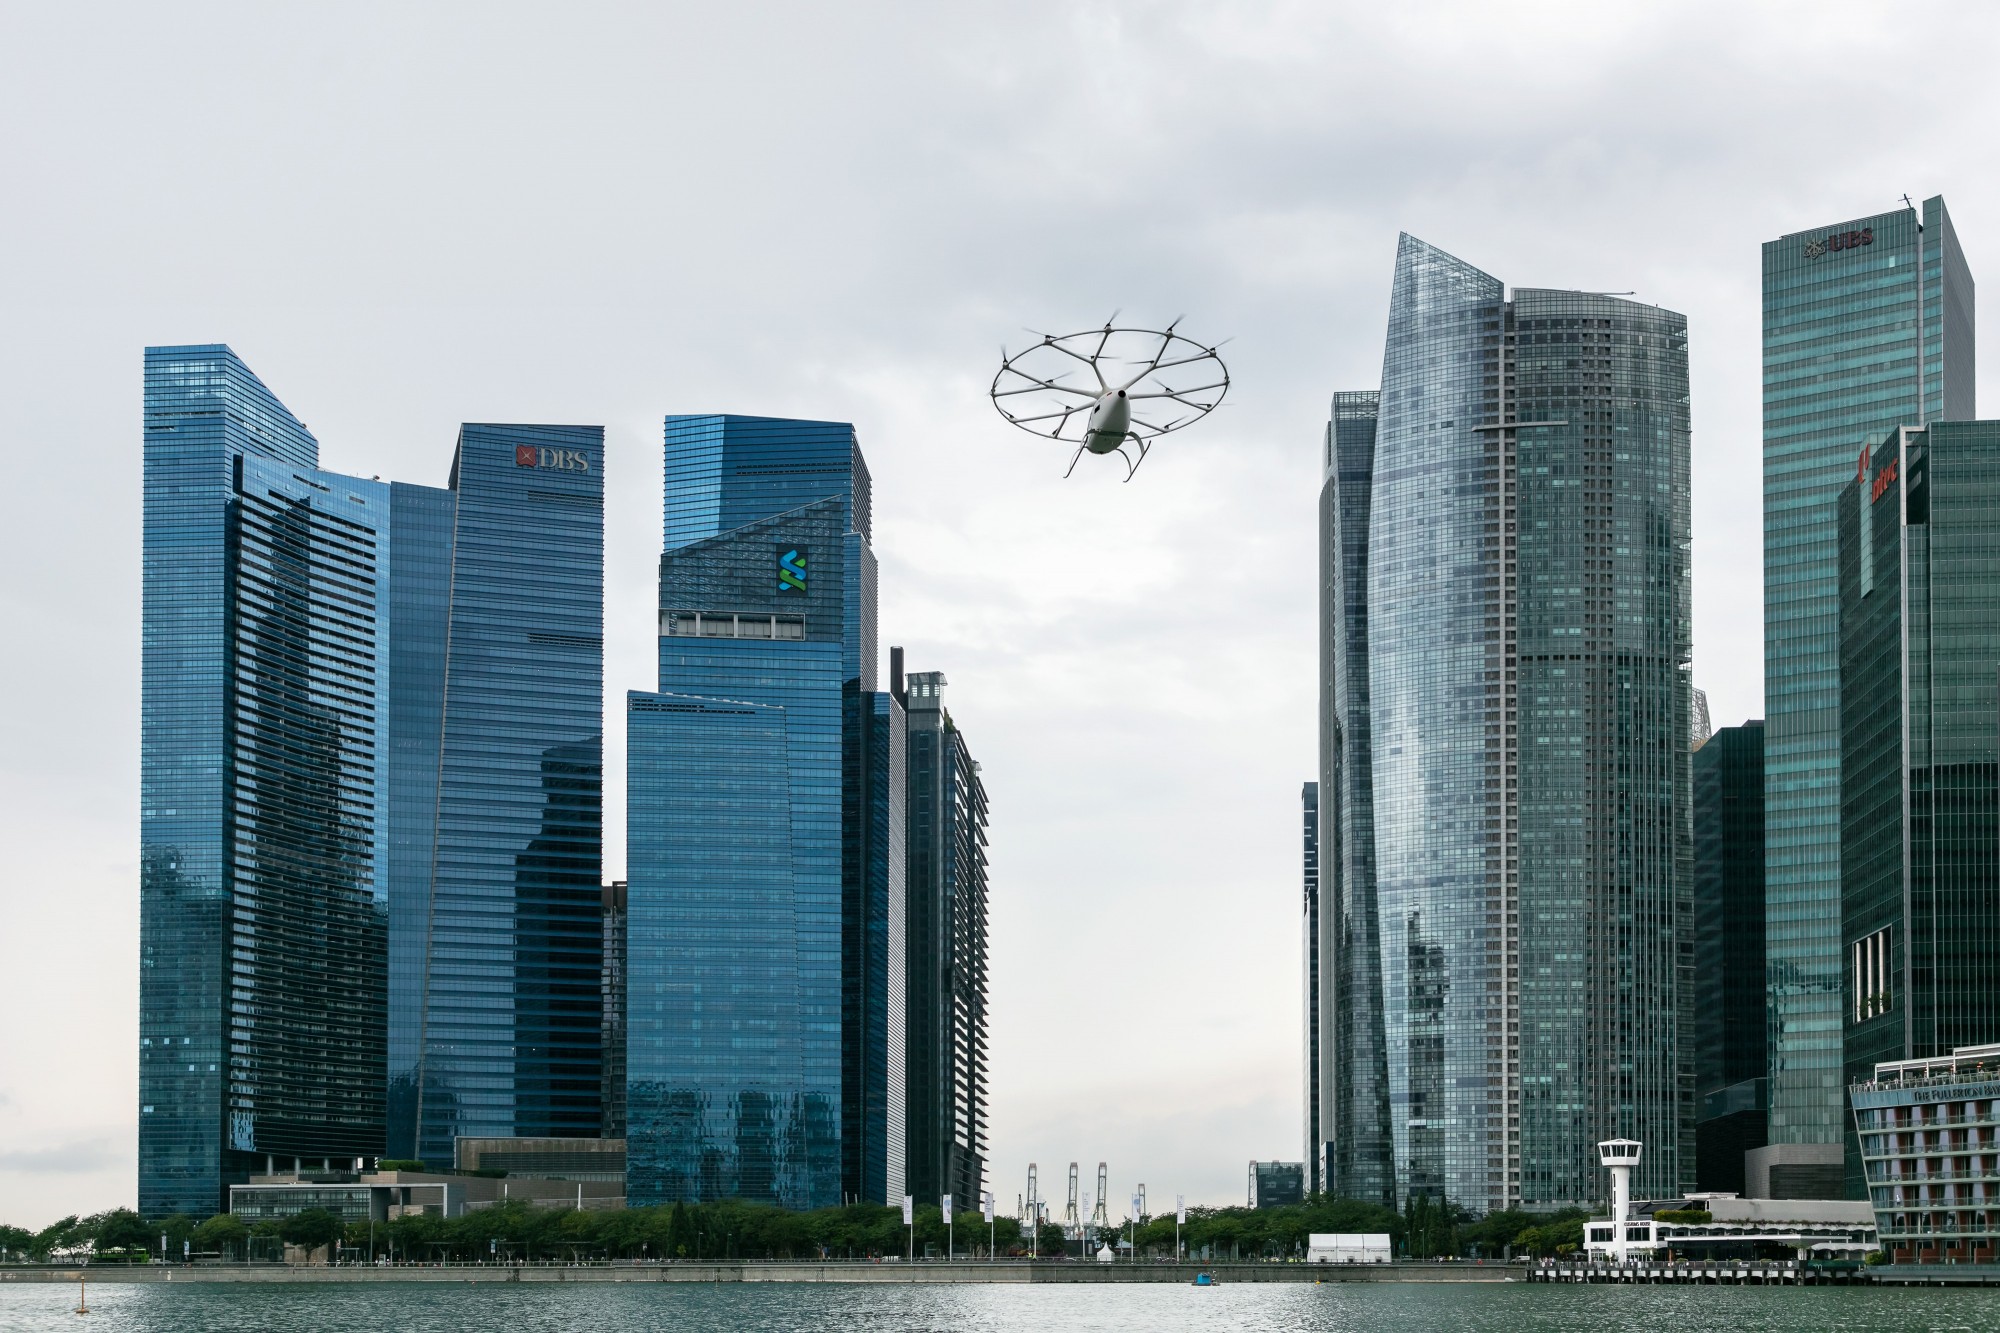 Volocopter plans to launch air taxis